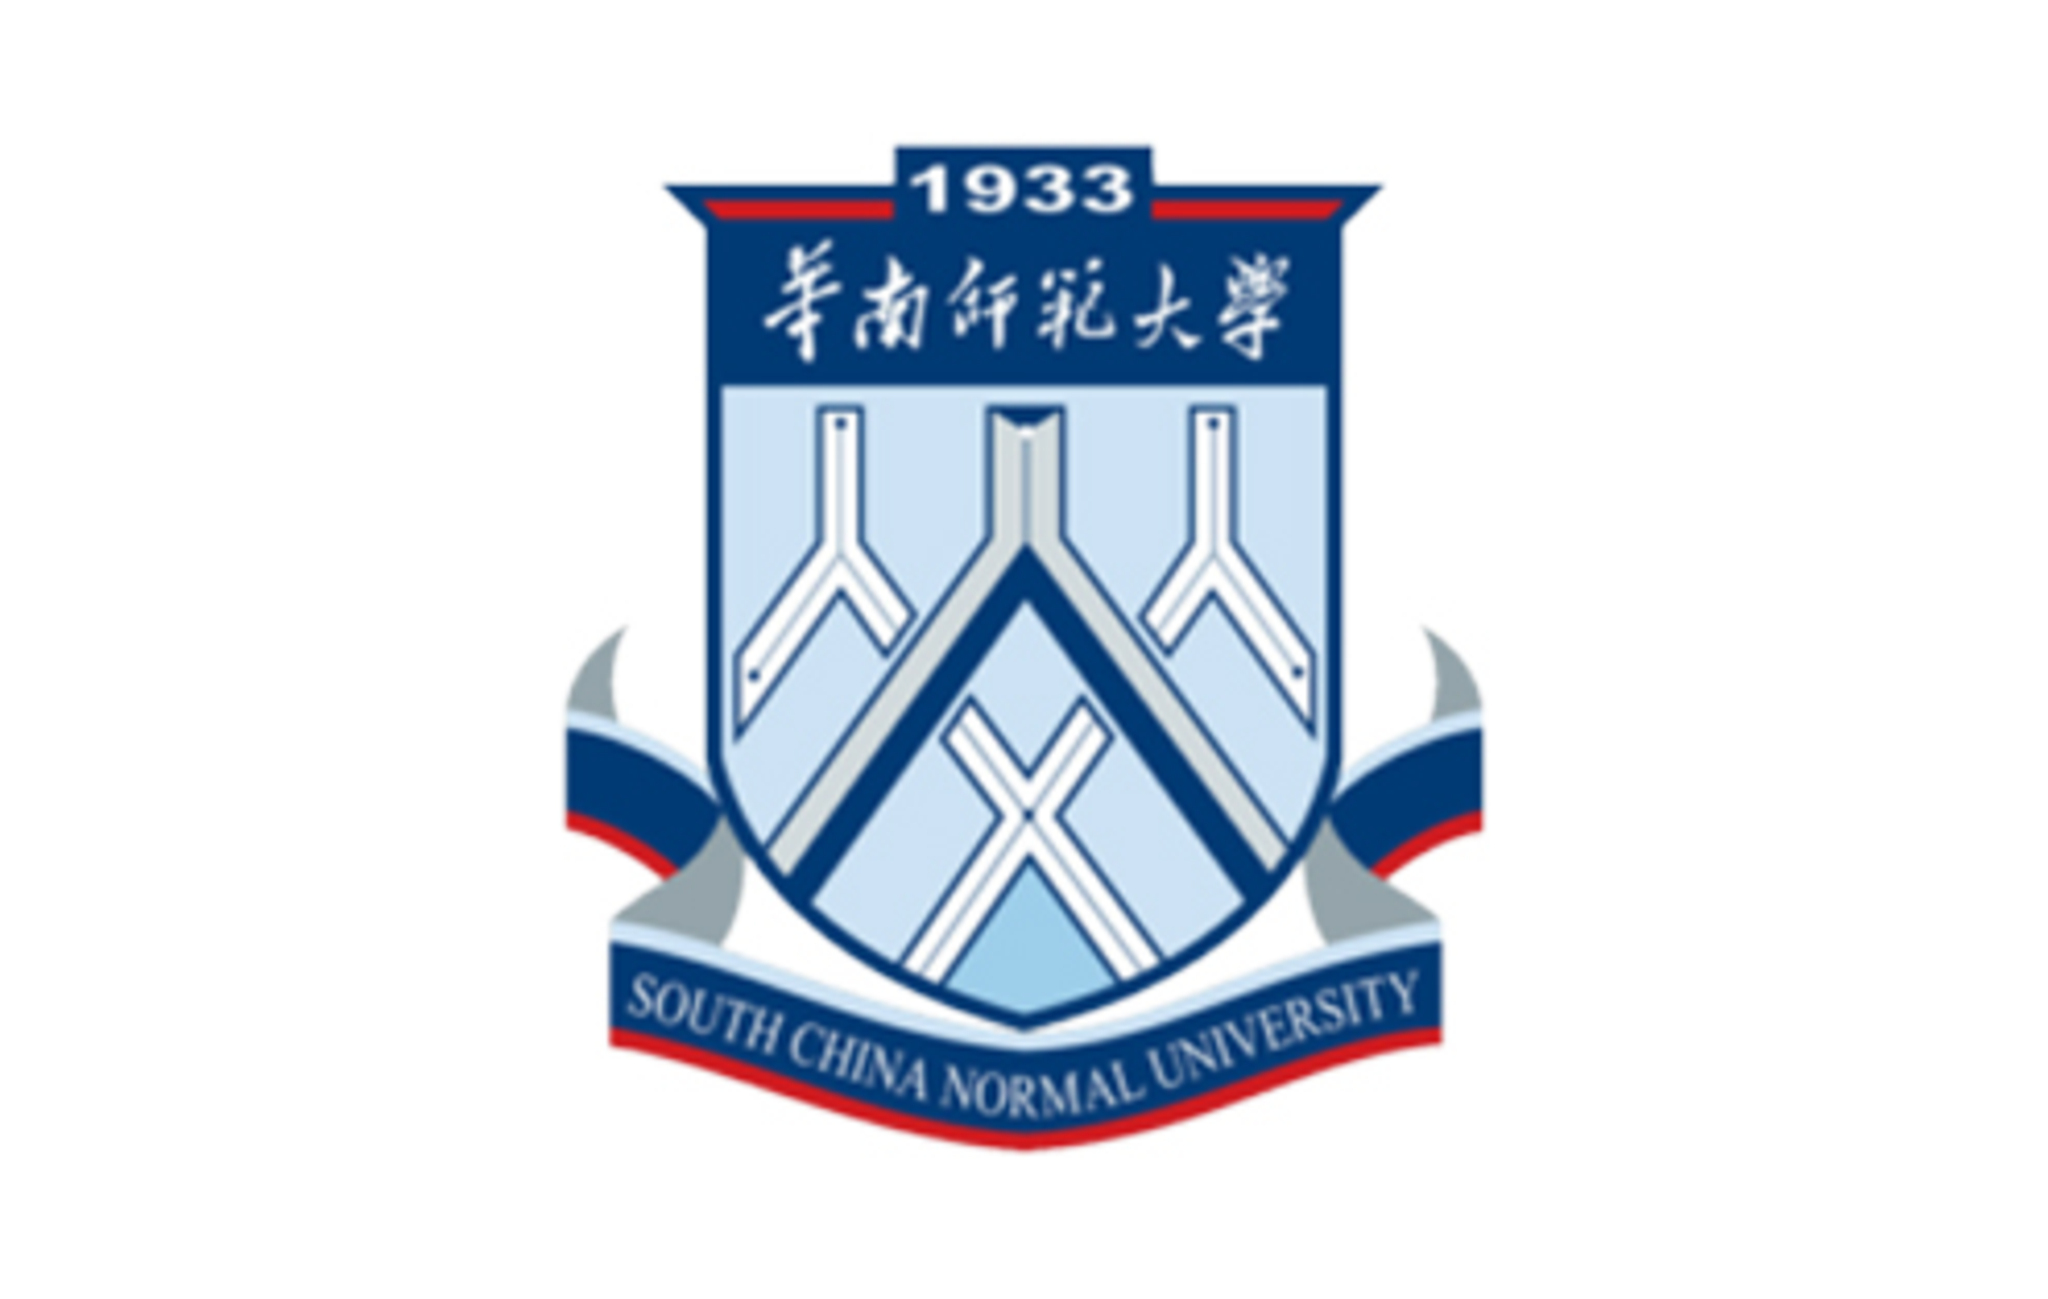 SCHOOL OF ECONOMICS AND MANAGEMENT SOUTH CHINA NORMAL UNIVERSITY Logo